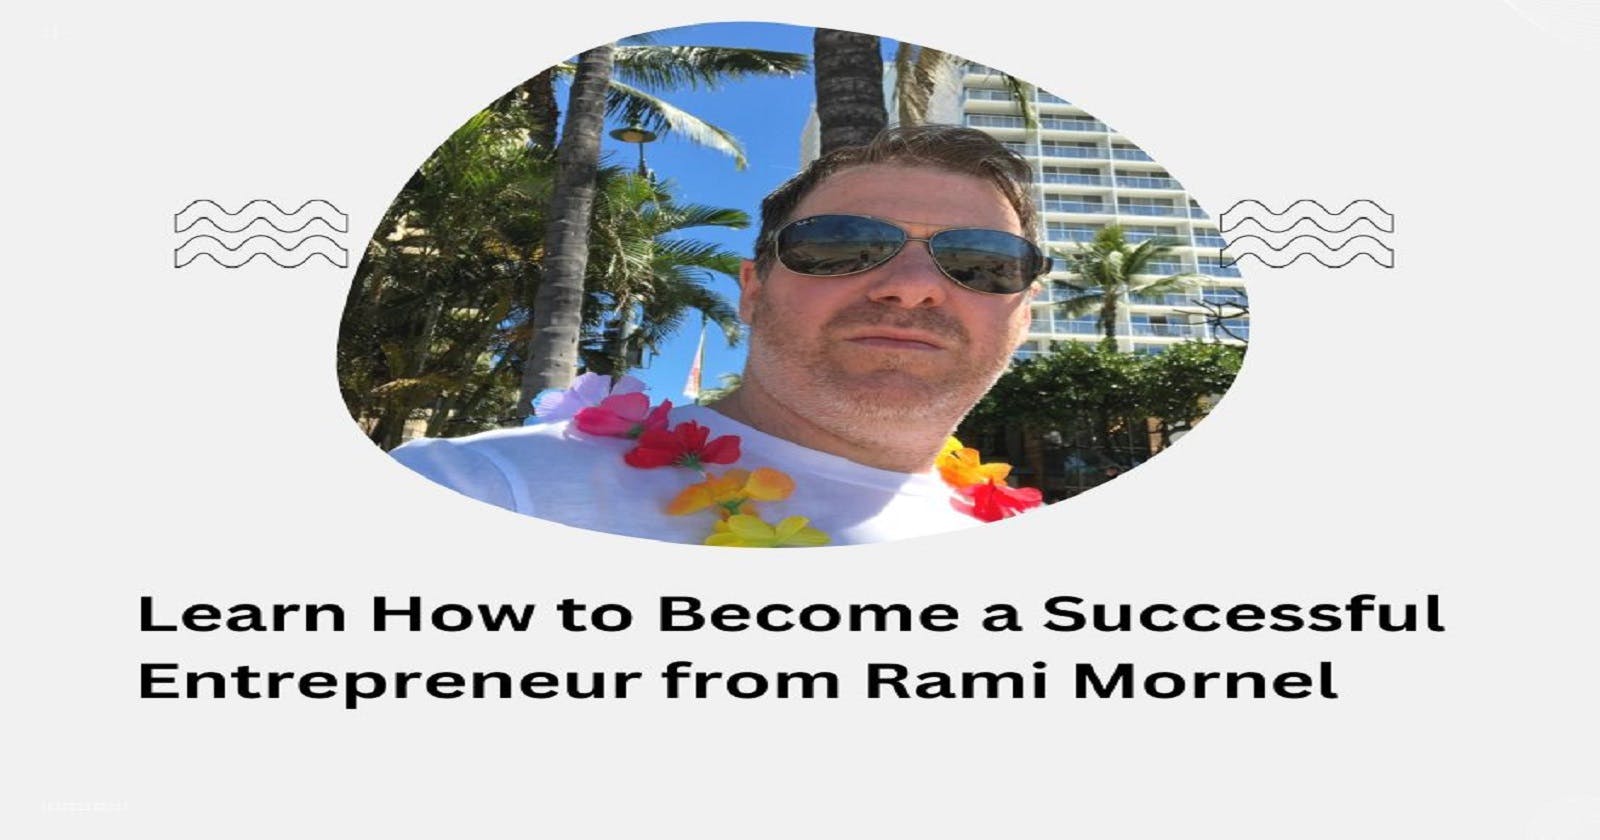 Learn How to Become a Successful Entrepreneur from Rami Mornel